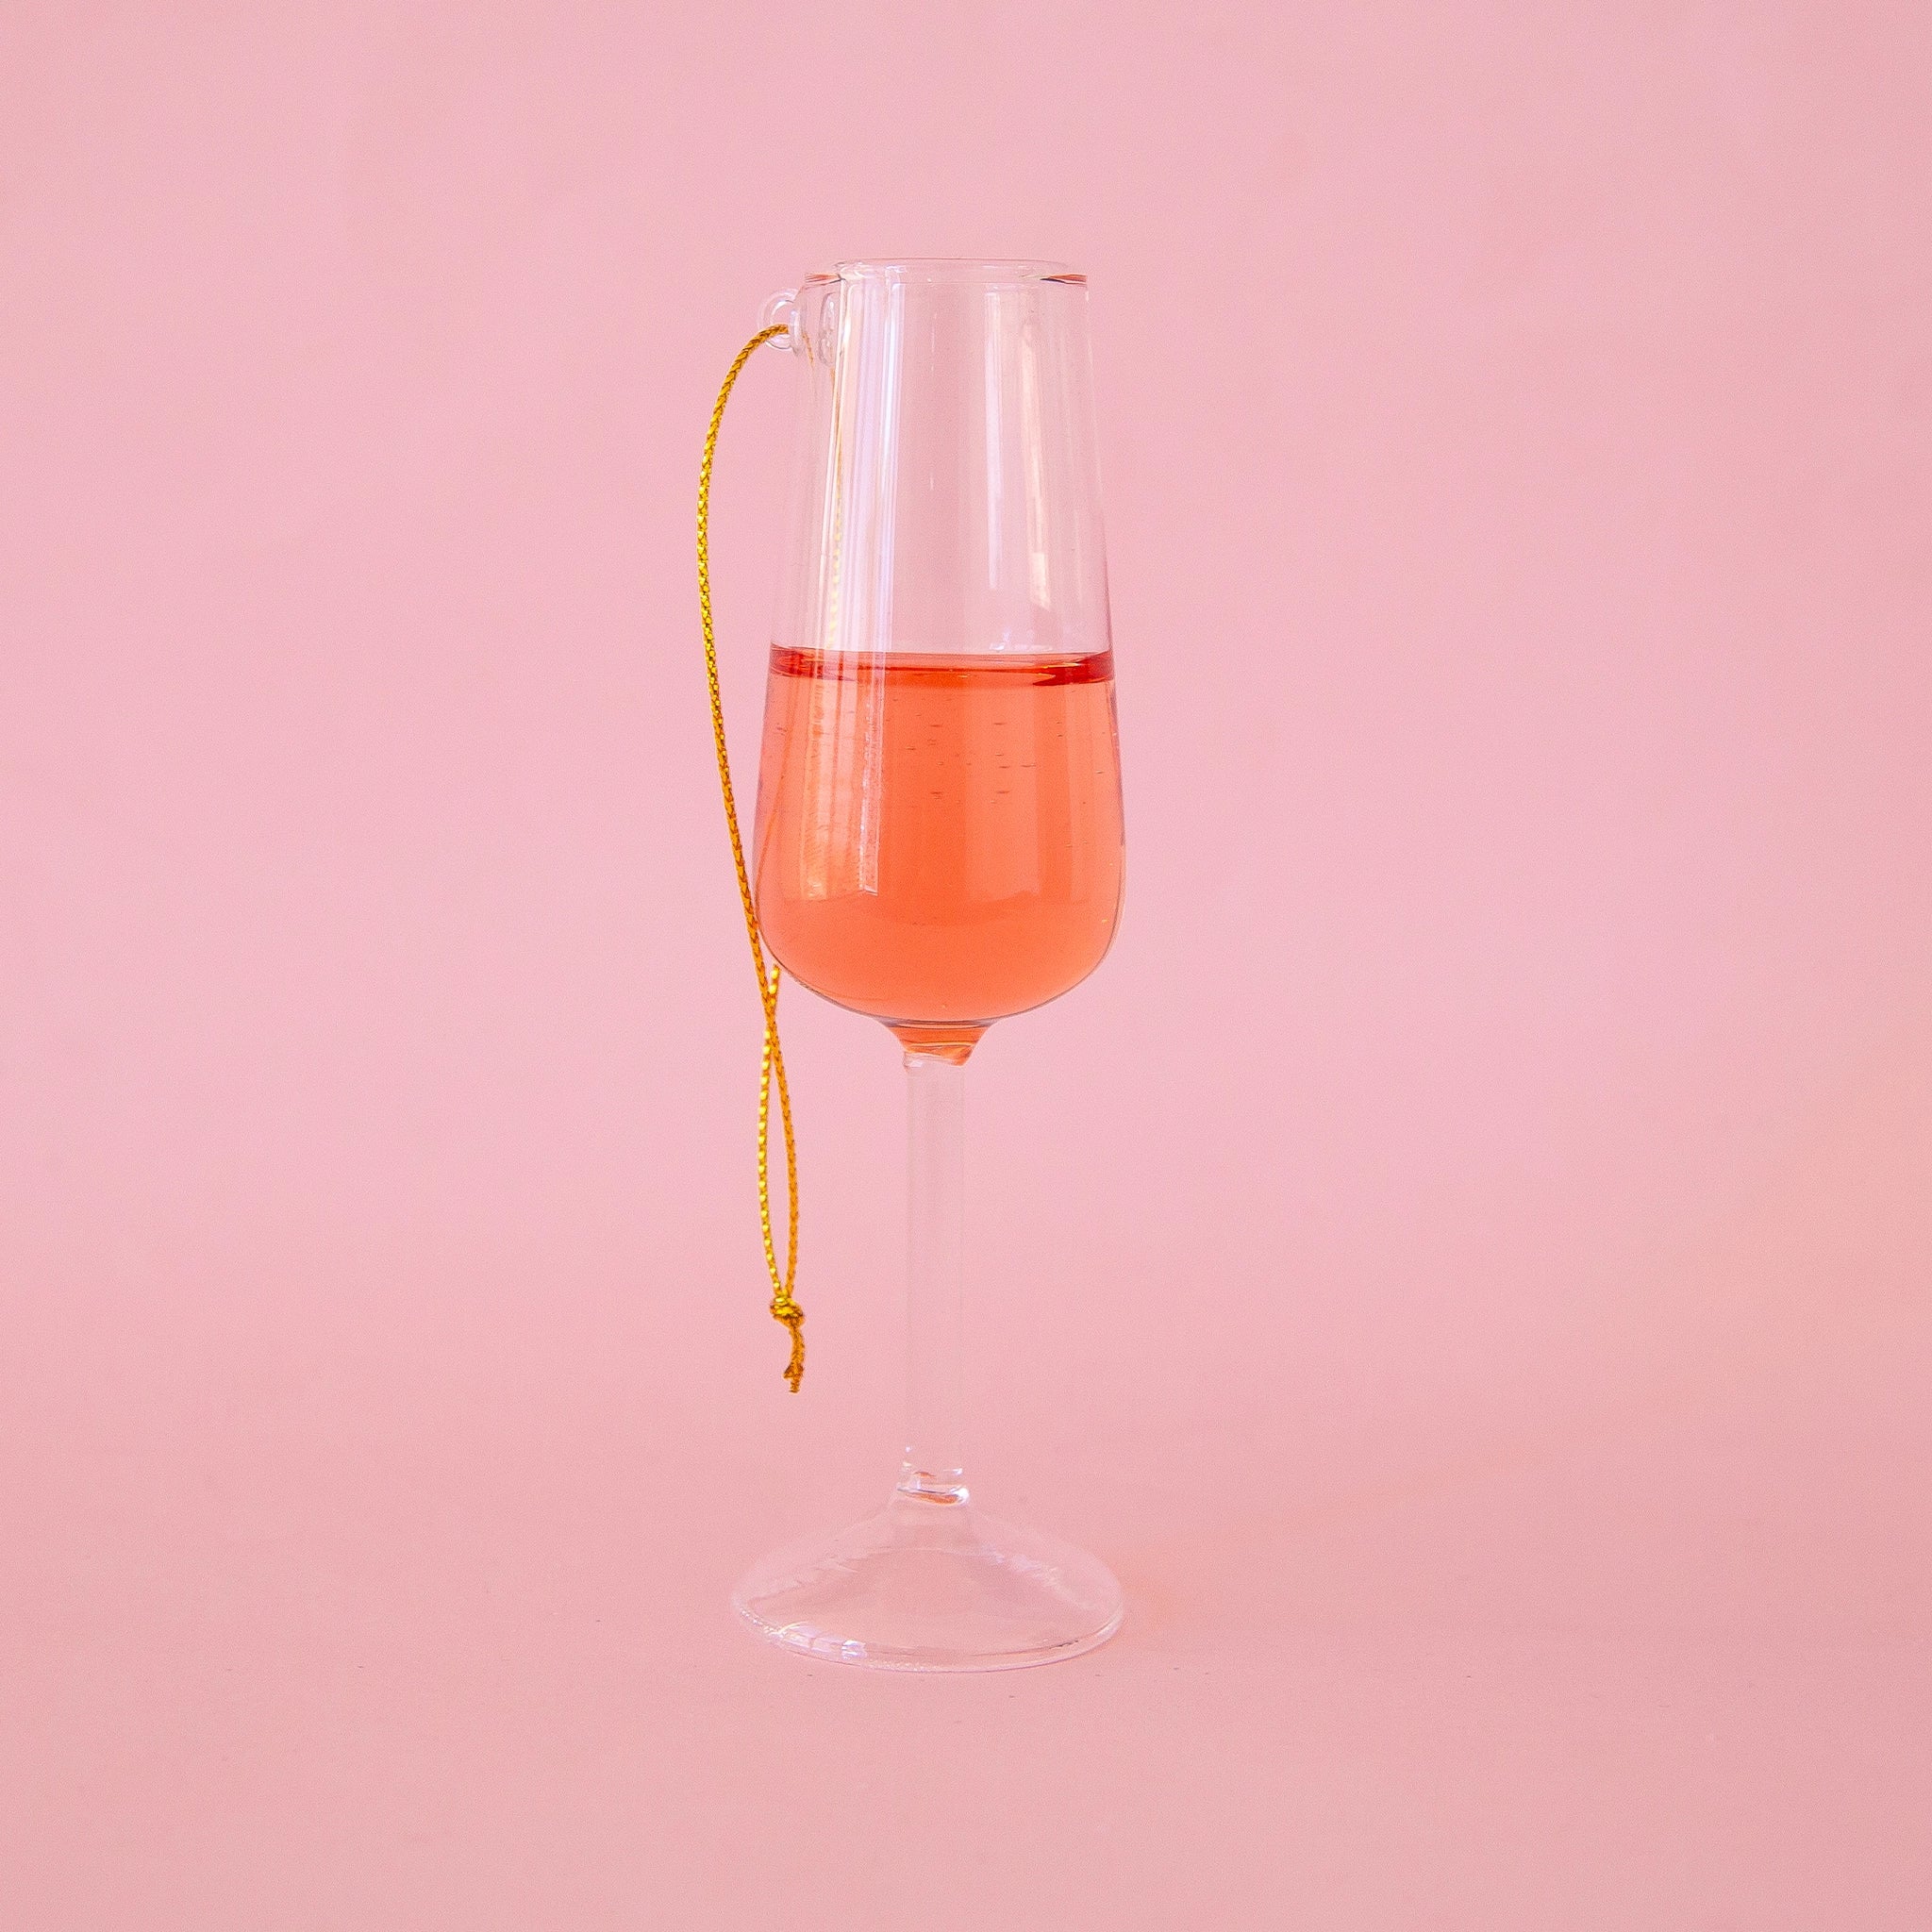 On a bright pink background is a glass ornament in the shape of a champagne flute with a pink bottom half resembling rose. 